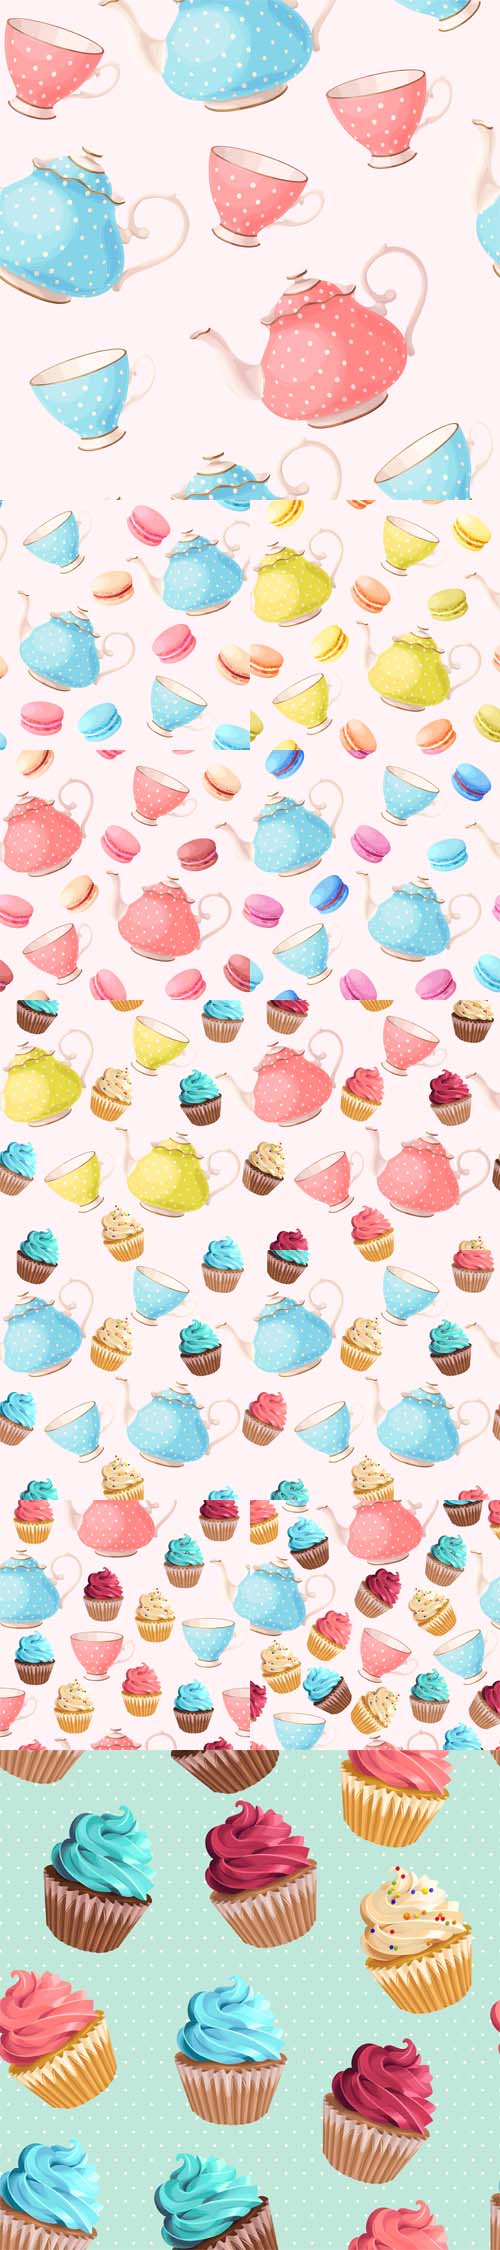 Vectors - Seamless Teacups and Cupcakes